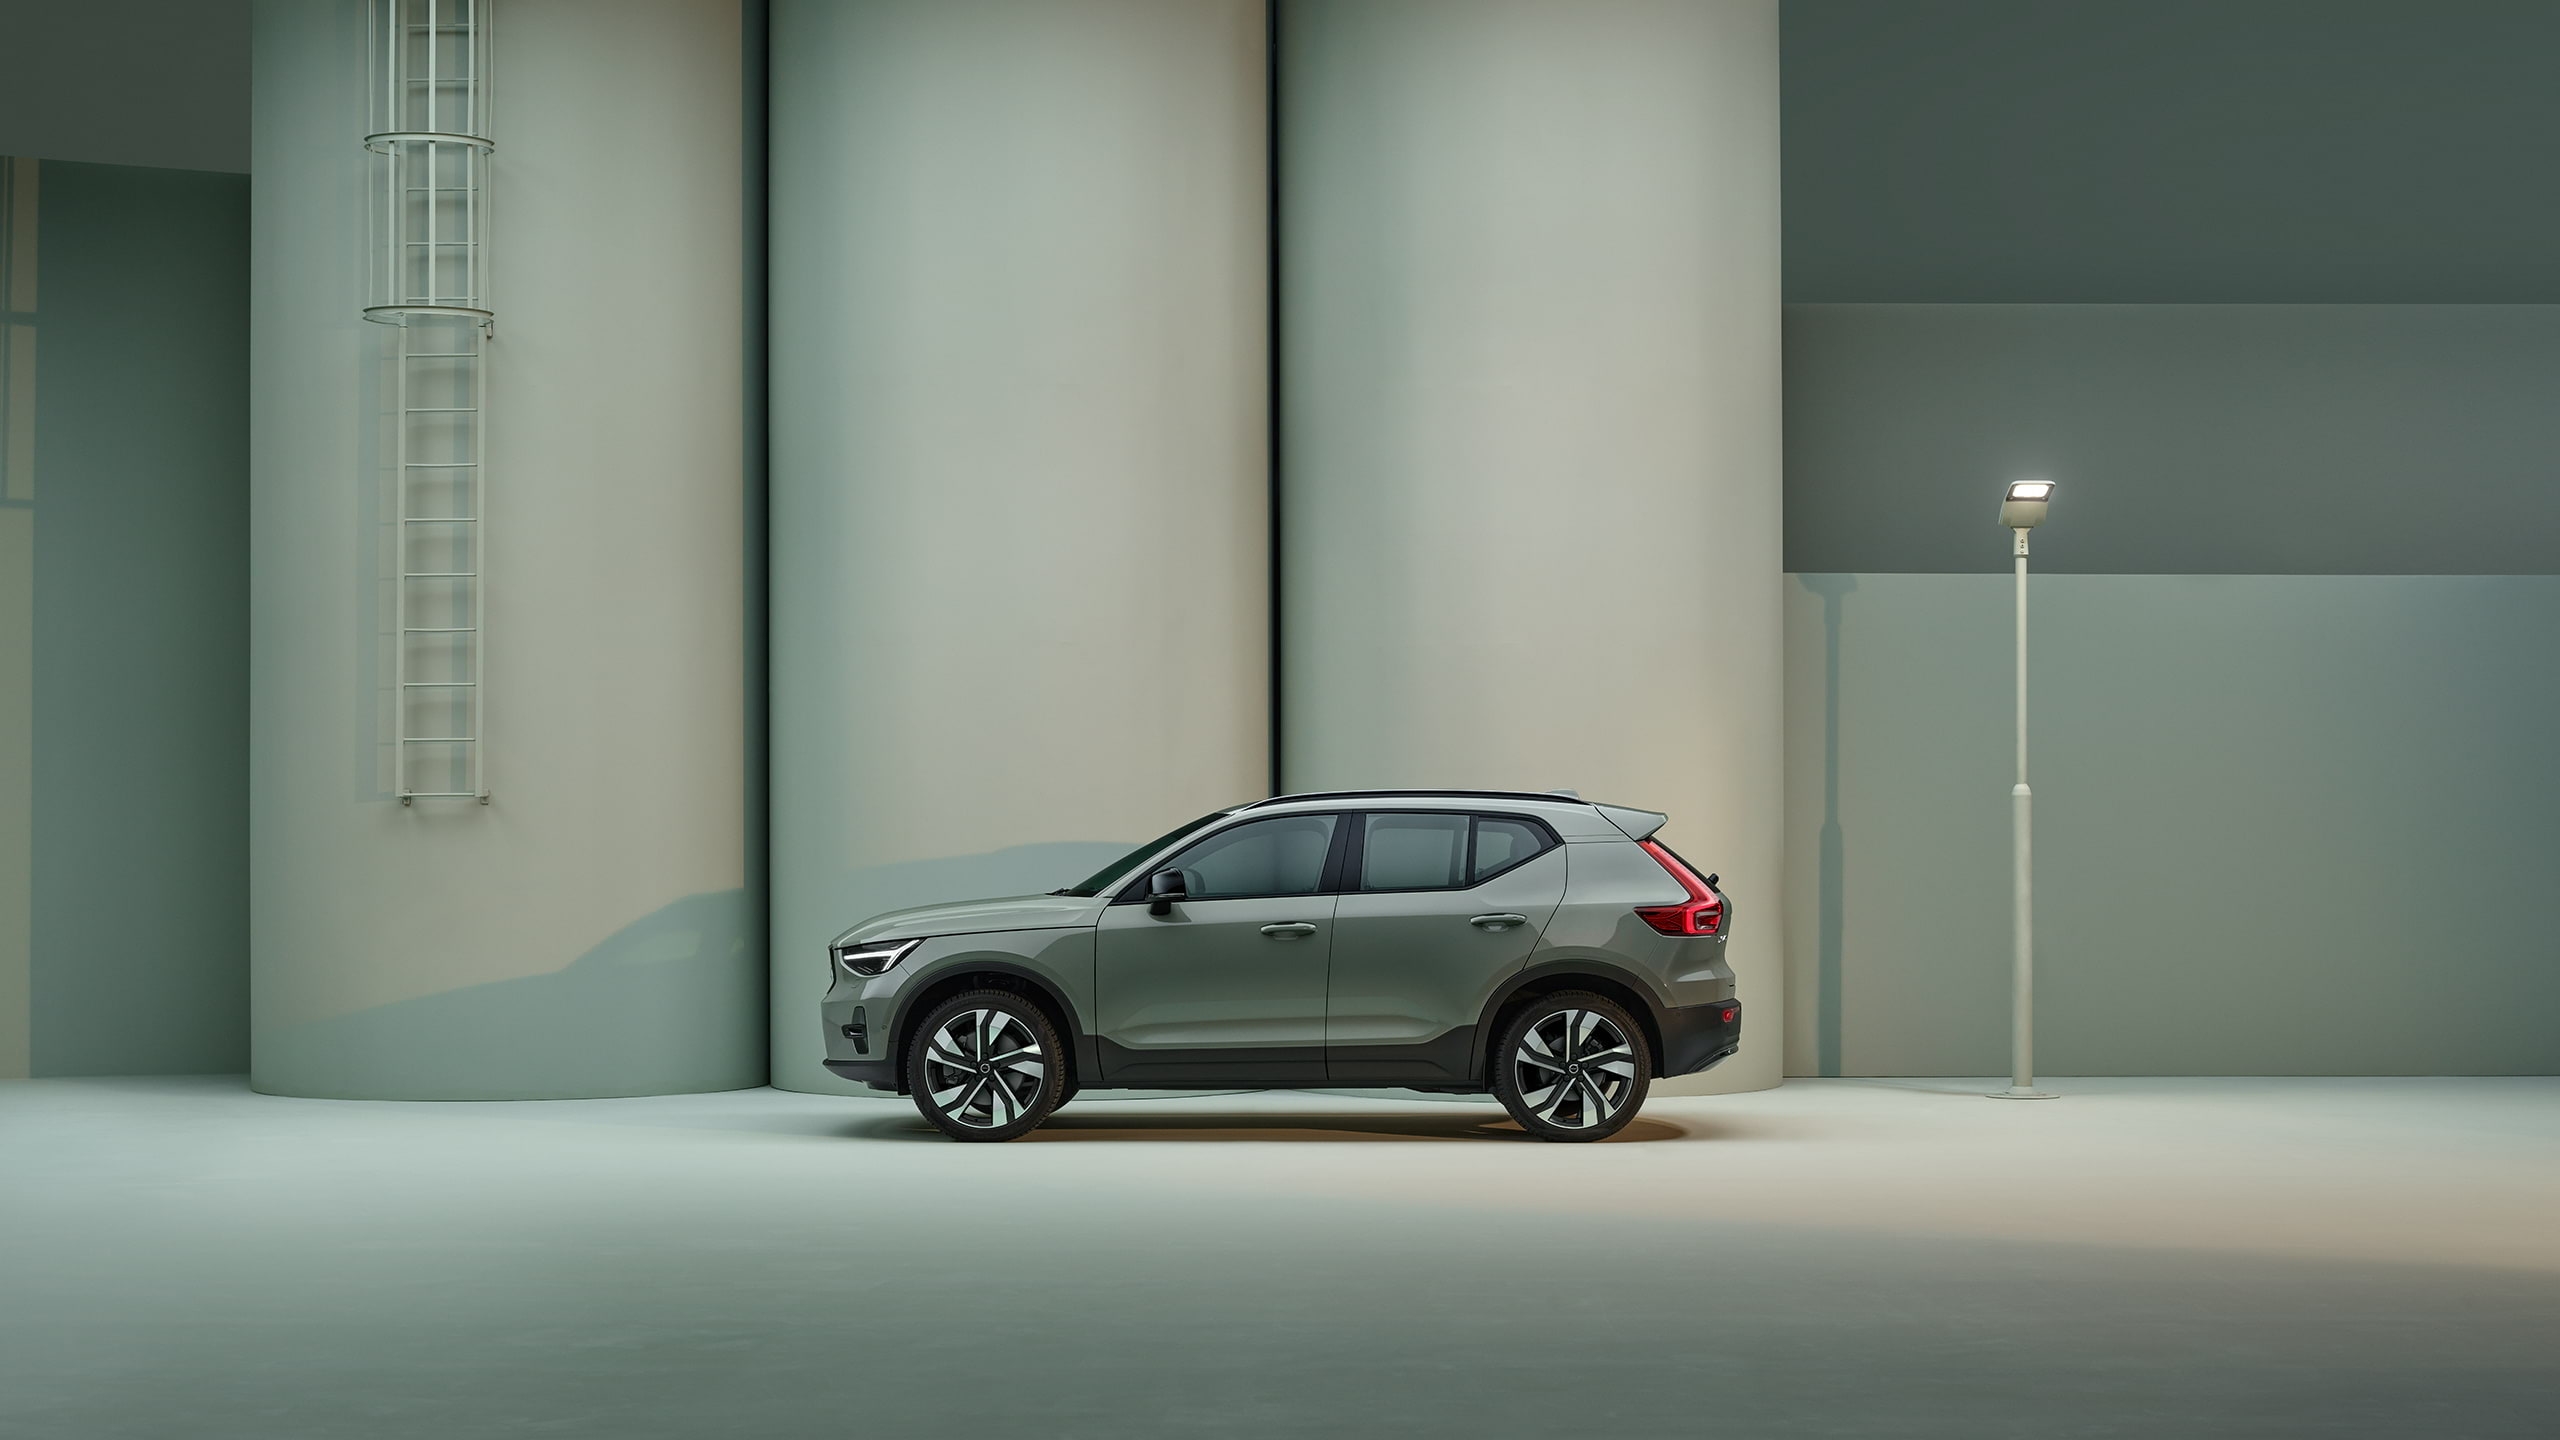 The side profile of the Volvo XC40 SUV